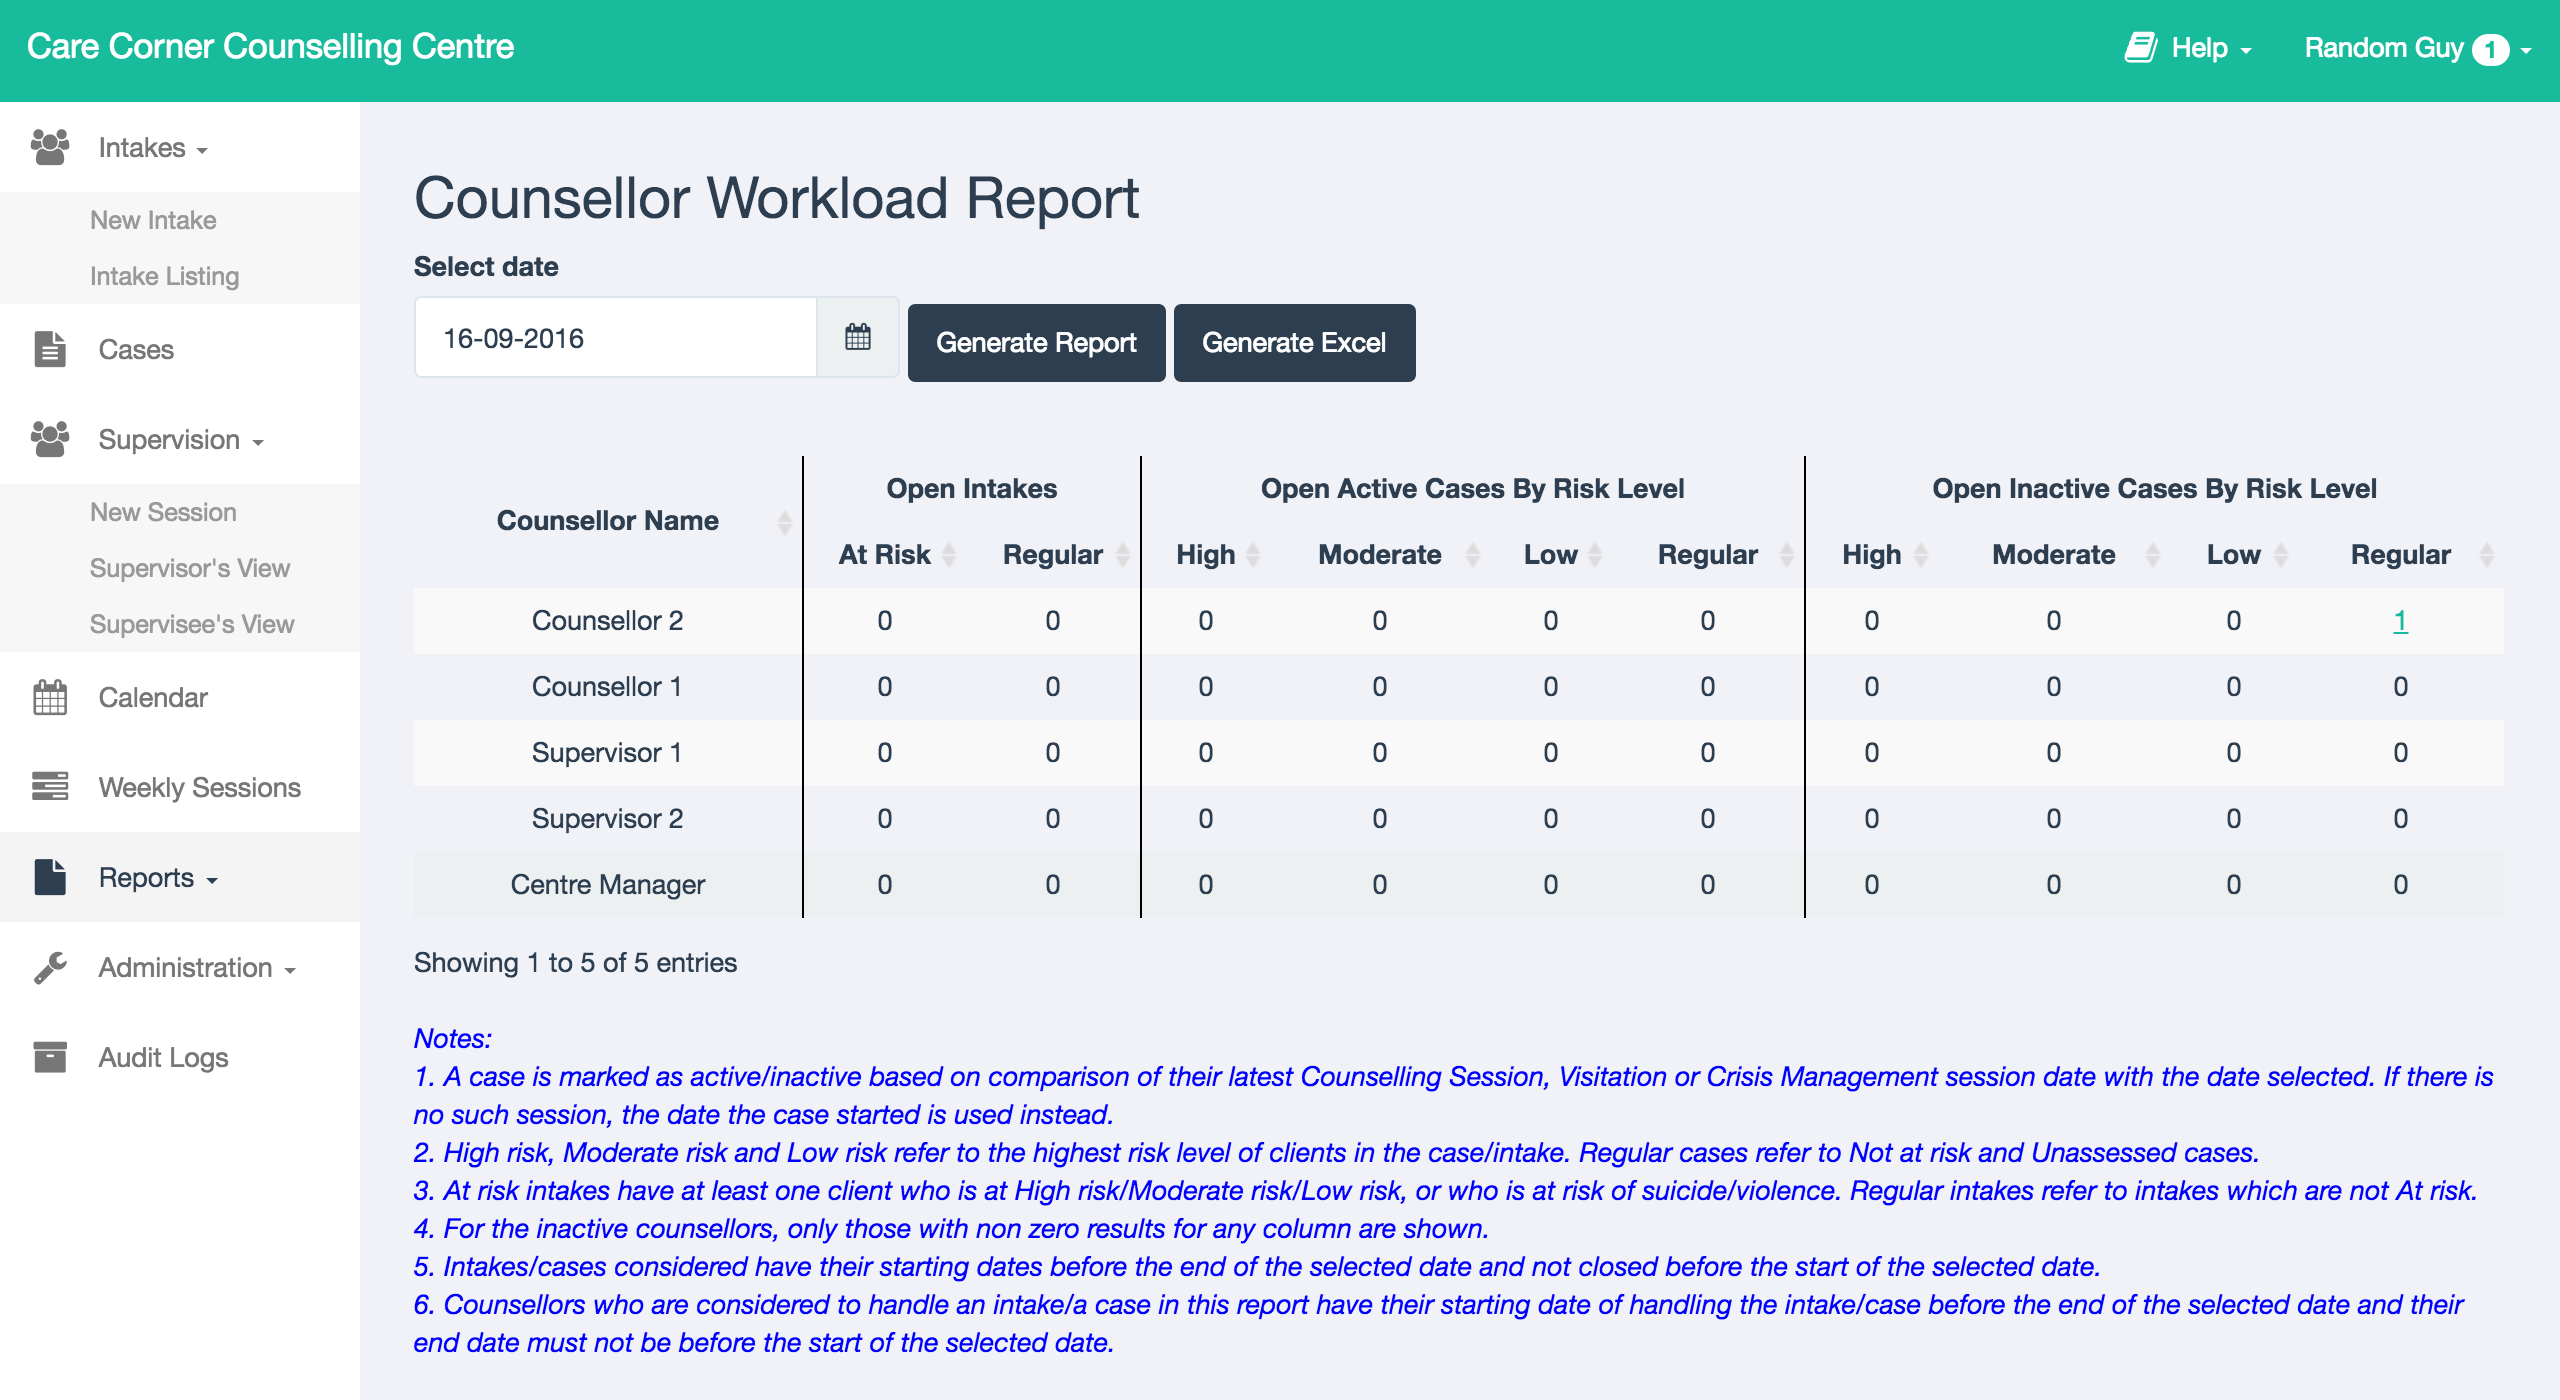 Counsellor Workload Report